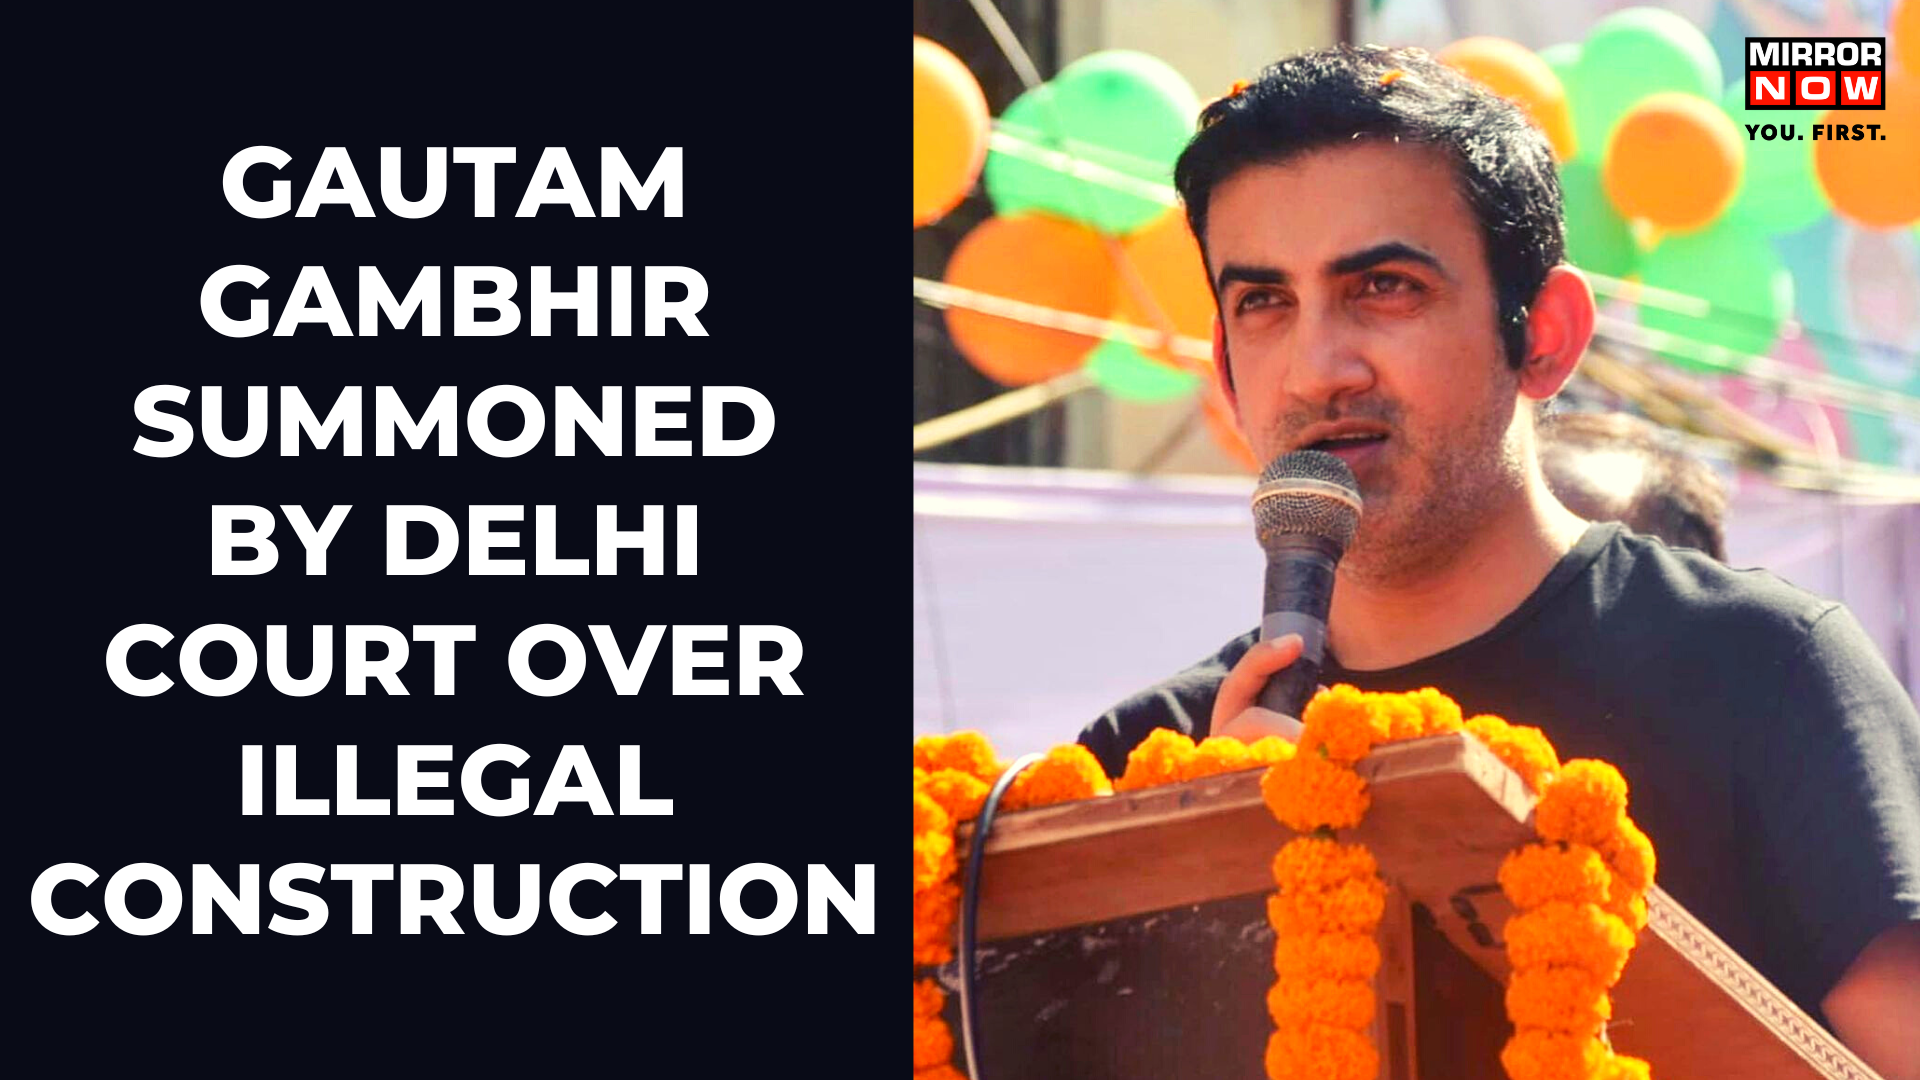 Court summoned Gautam Gambhir, accused of building a library on government land